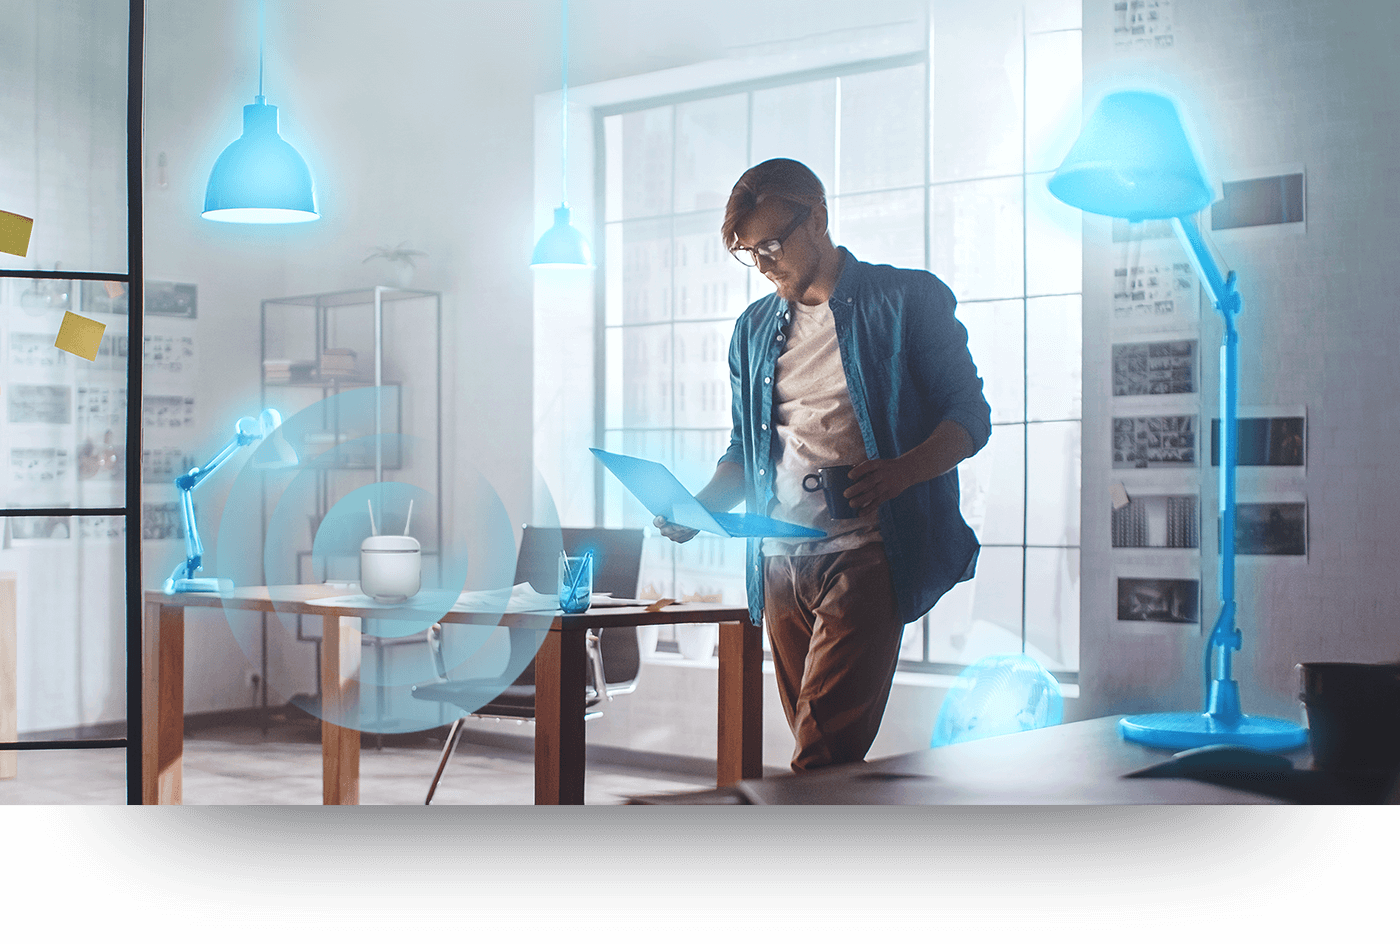 Man surrounded by smart home devices.